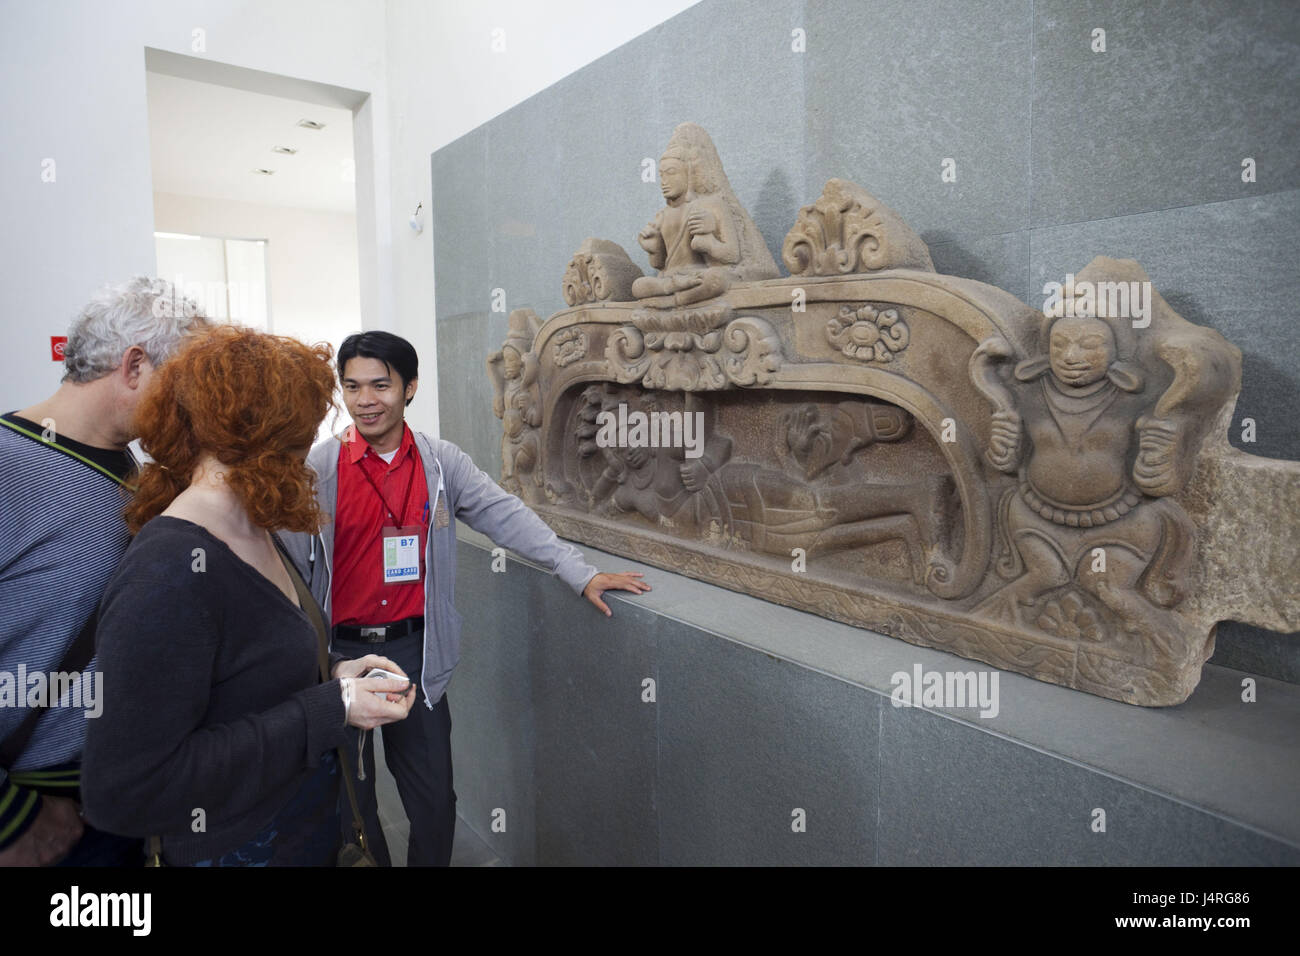 Vietnam, Danang, museum of the Cham sculpture, tourist, on the sandstone relief looking, no model release, Stock Photo